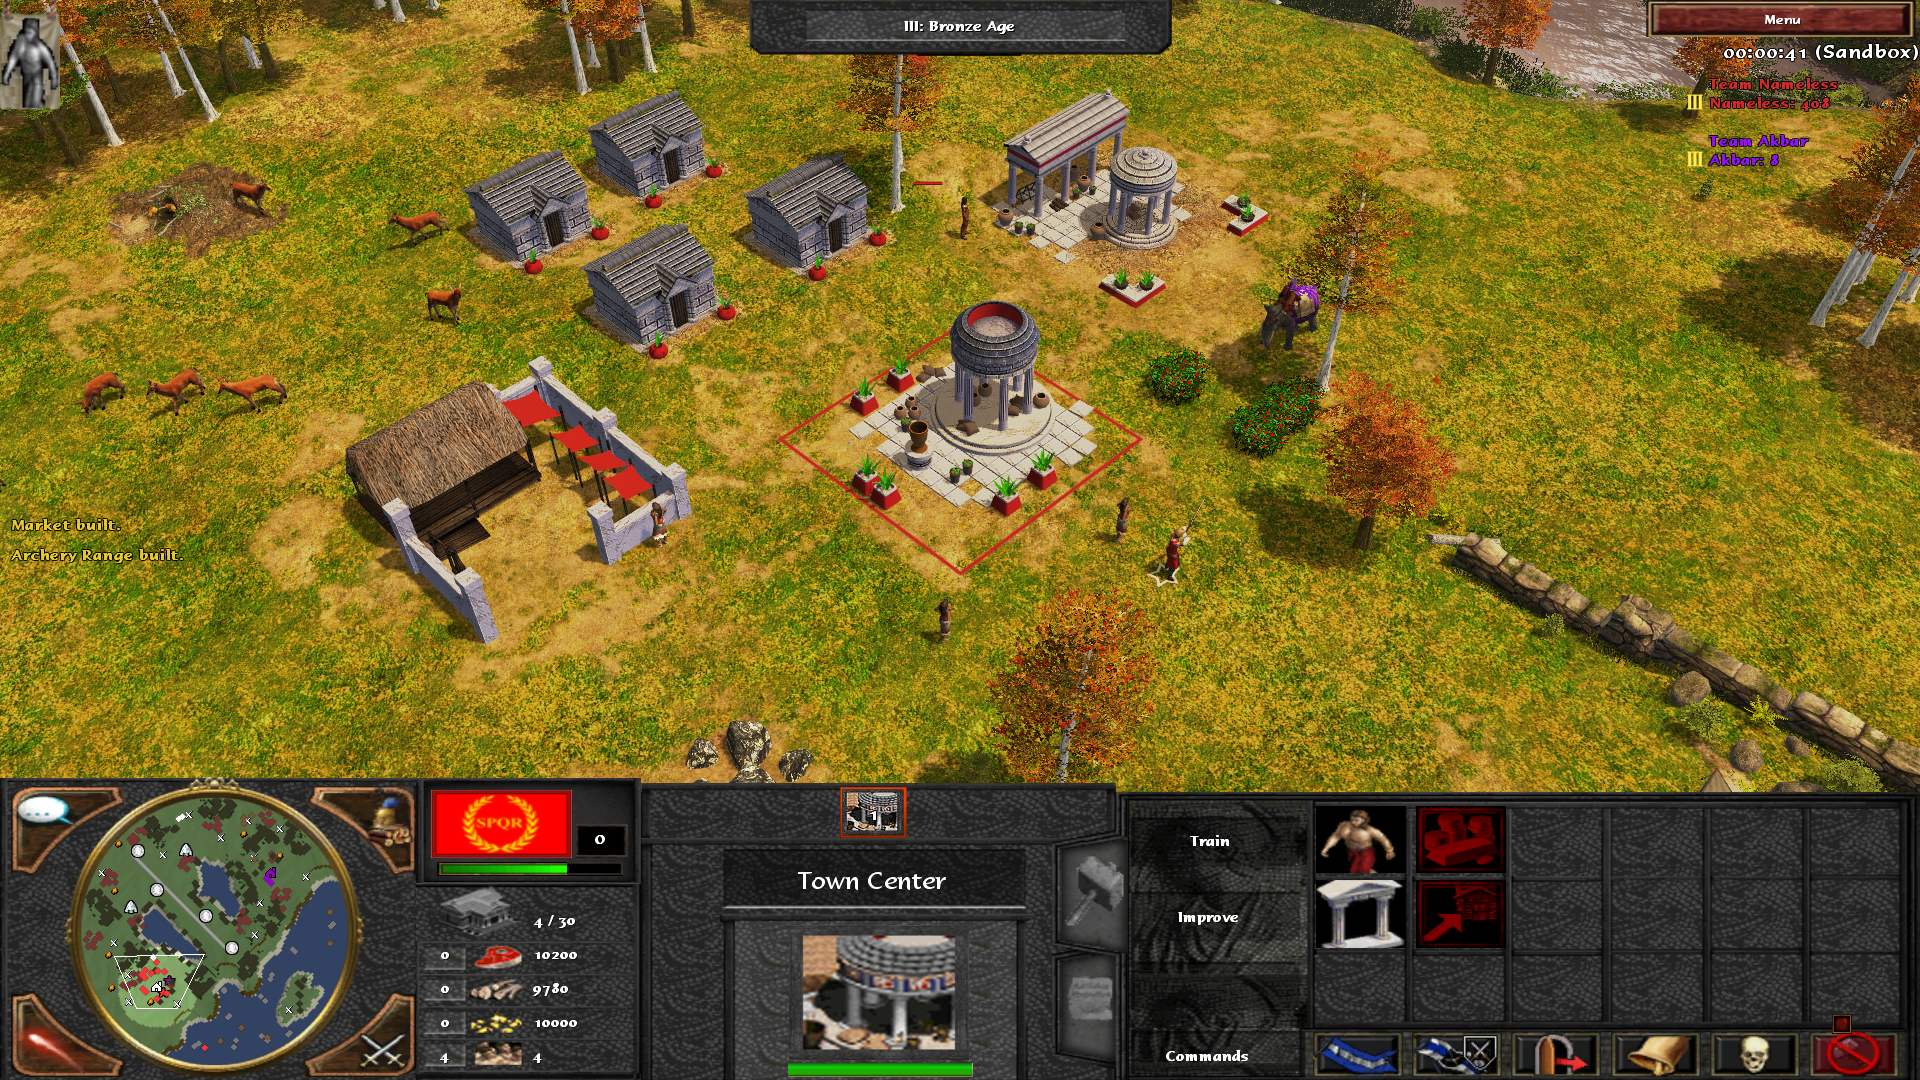 Age of empires 3 crashes when starting game of the world